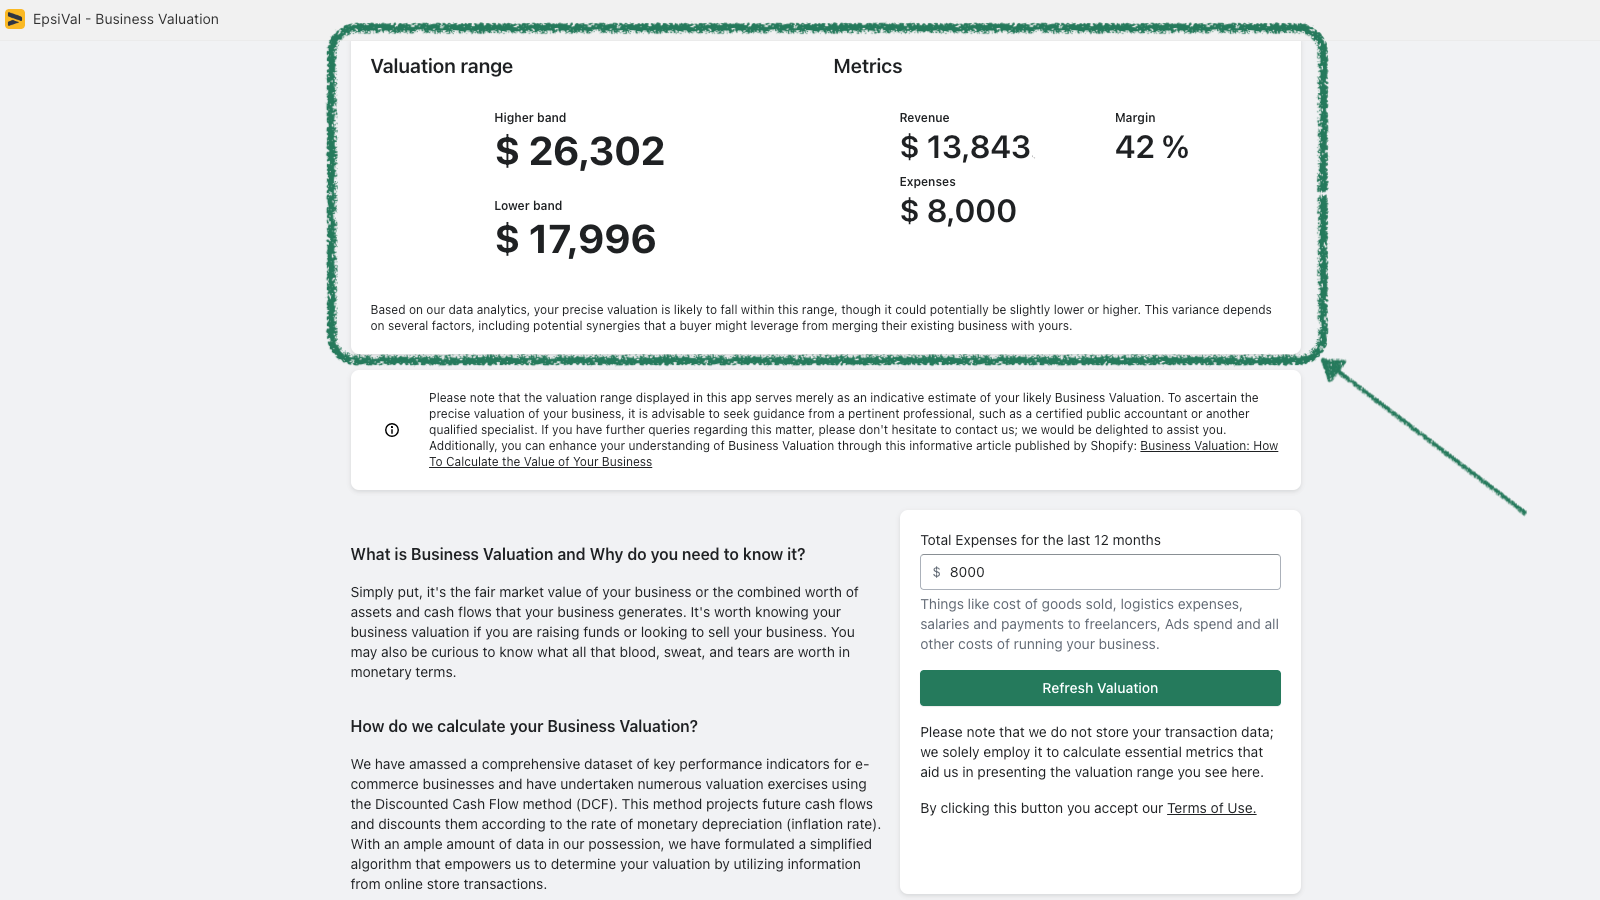 Section with the valuation range and performance metrics